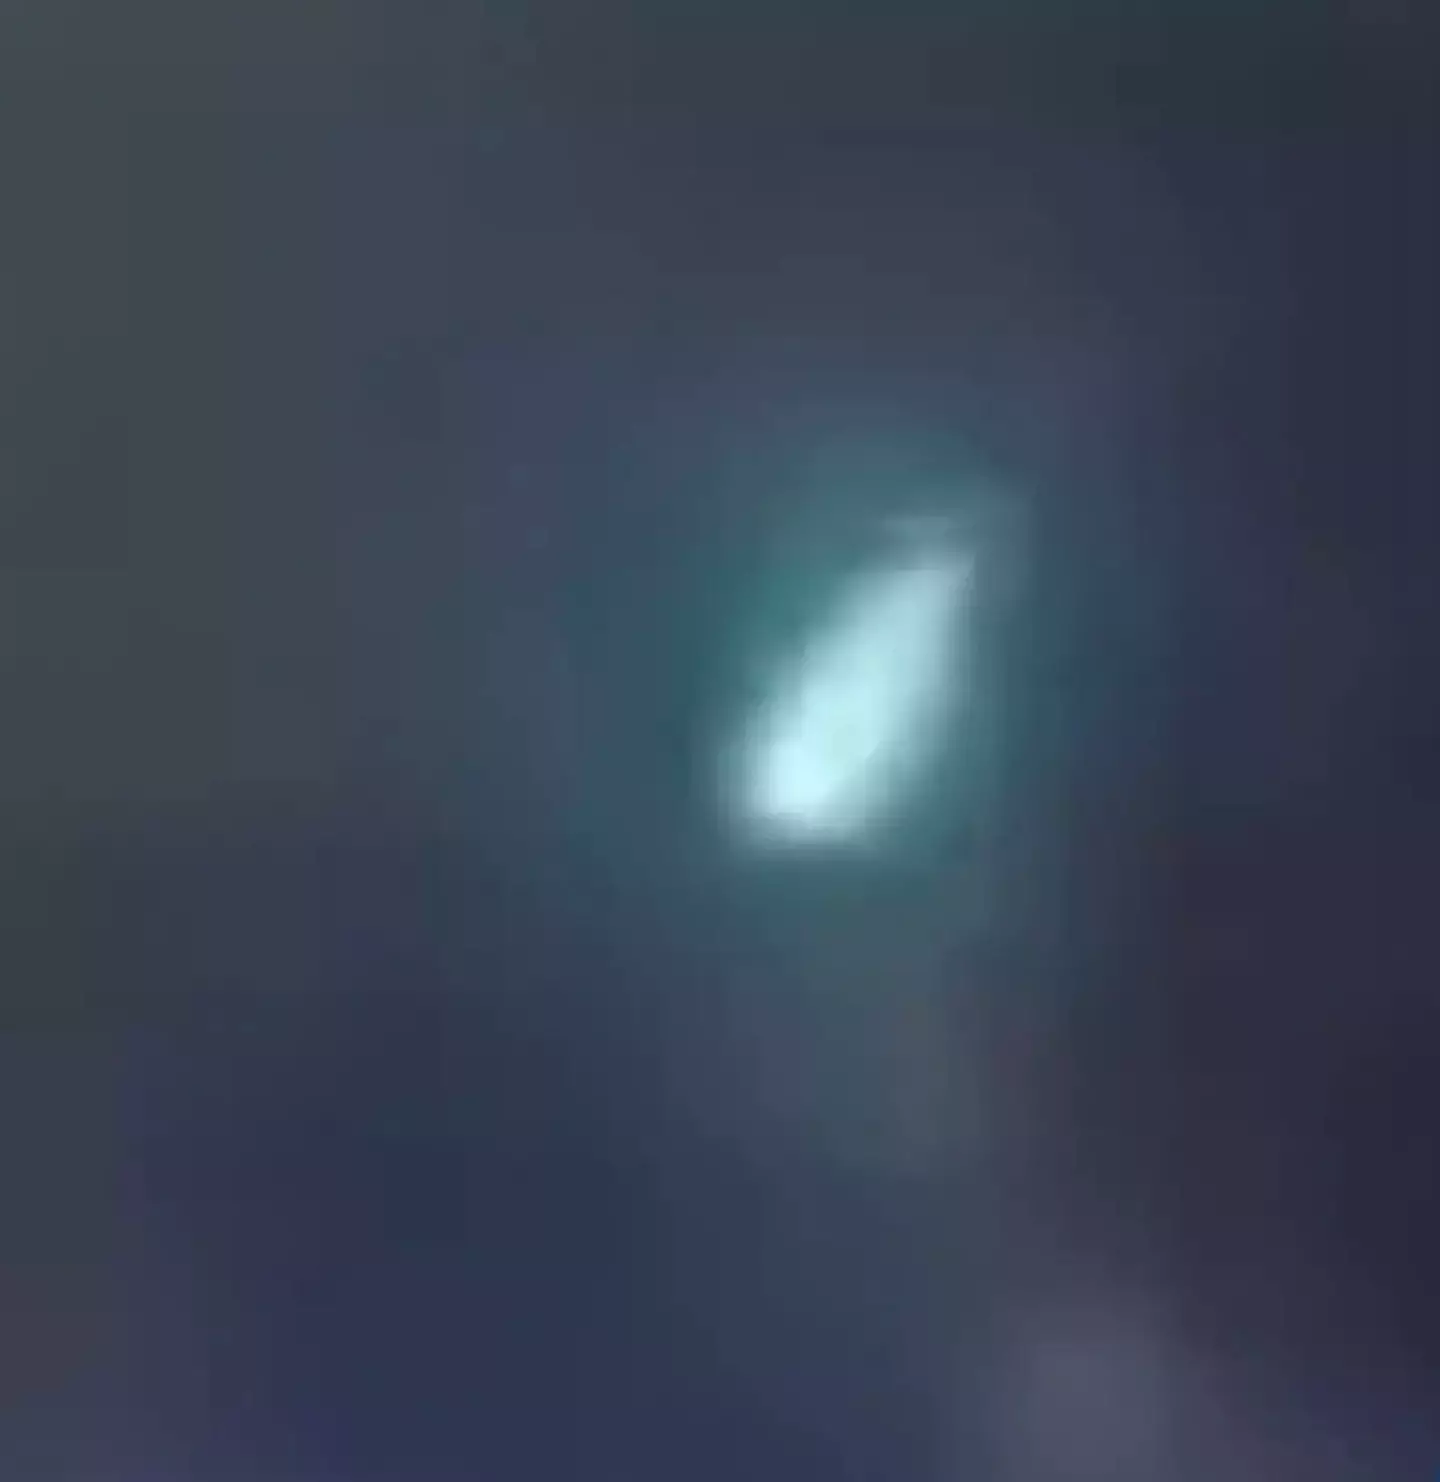 The 'UFO' was initially spotted in the sky.